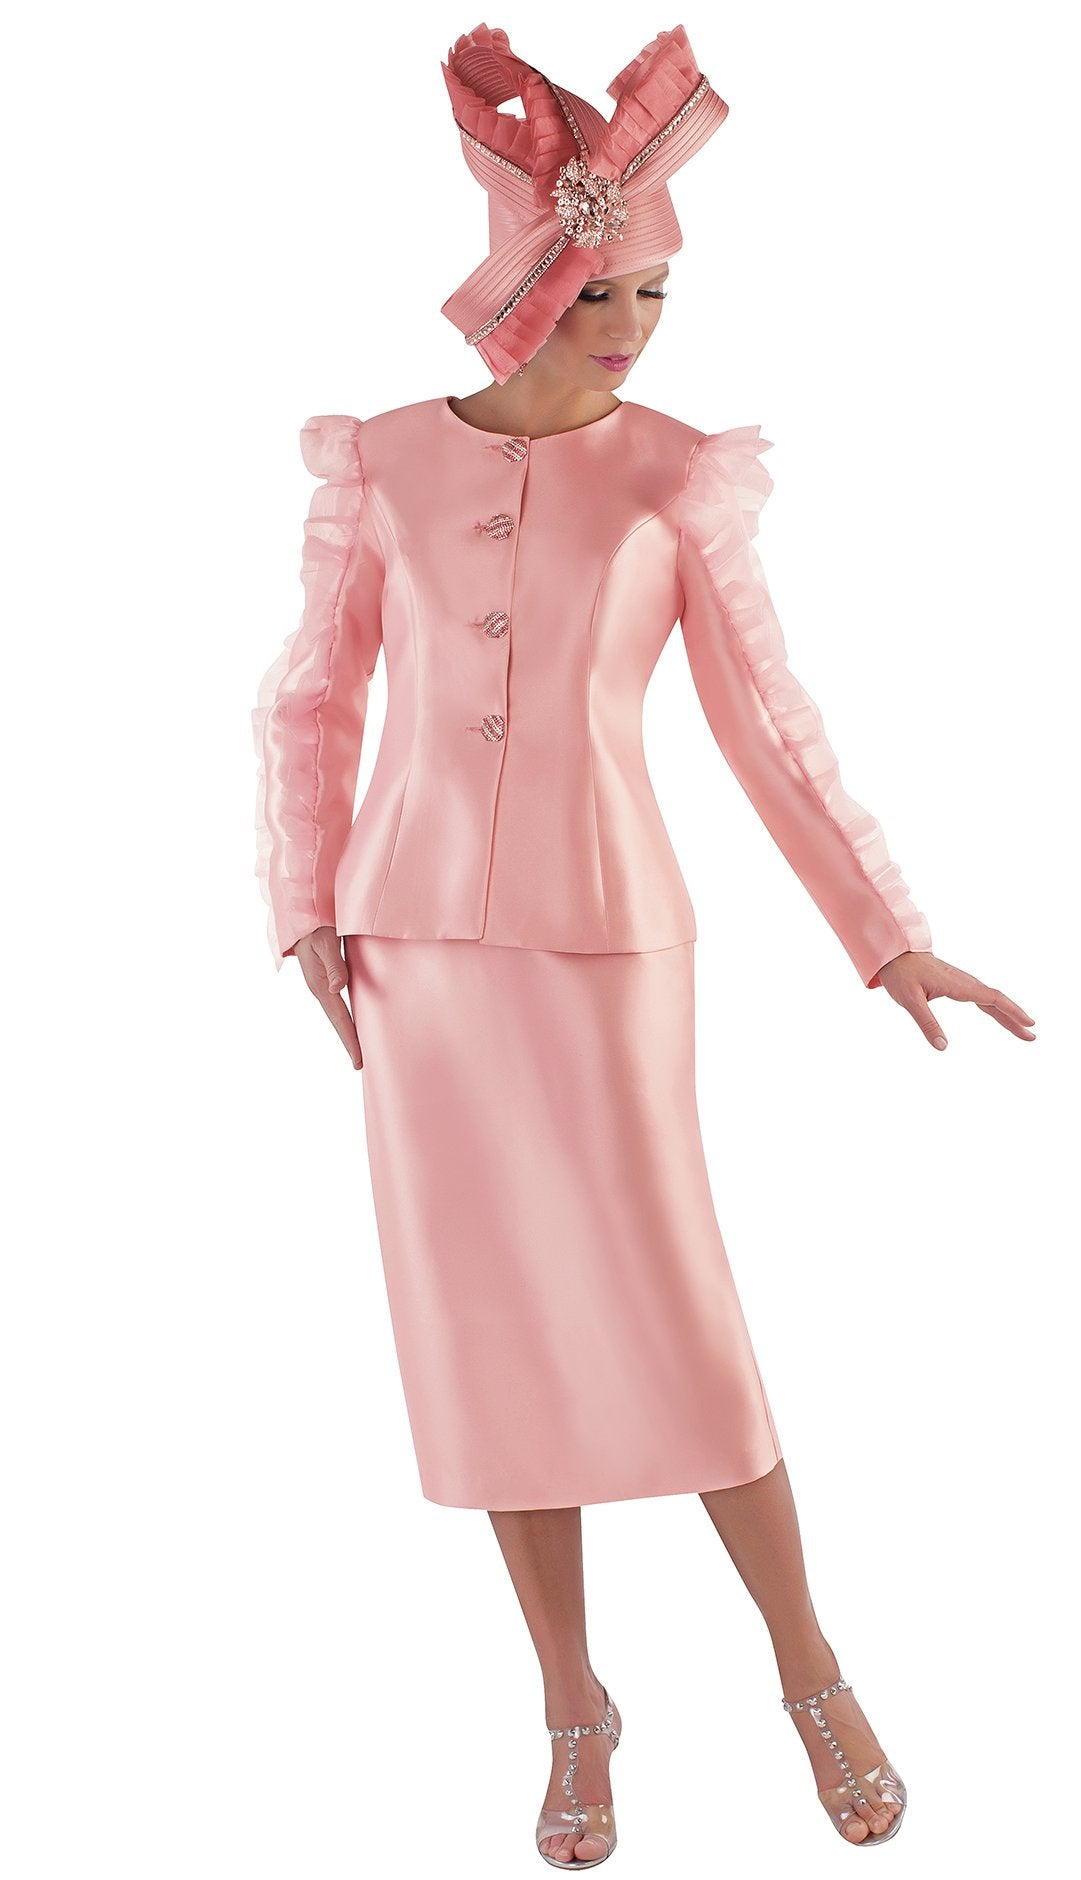 Tally Taylor Suit 4729C-Blush/Peach - Church Suits For Less